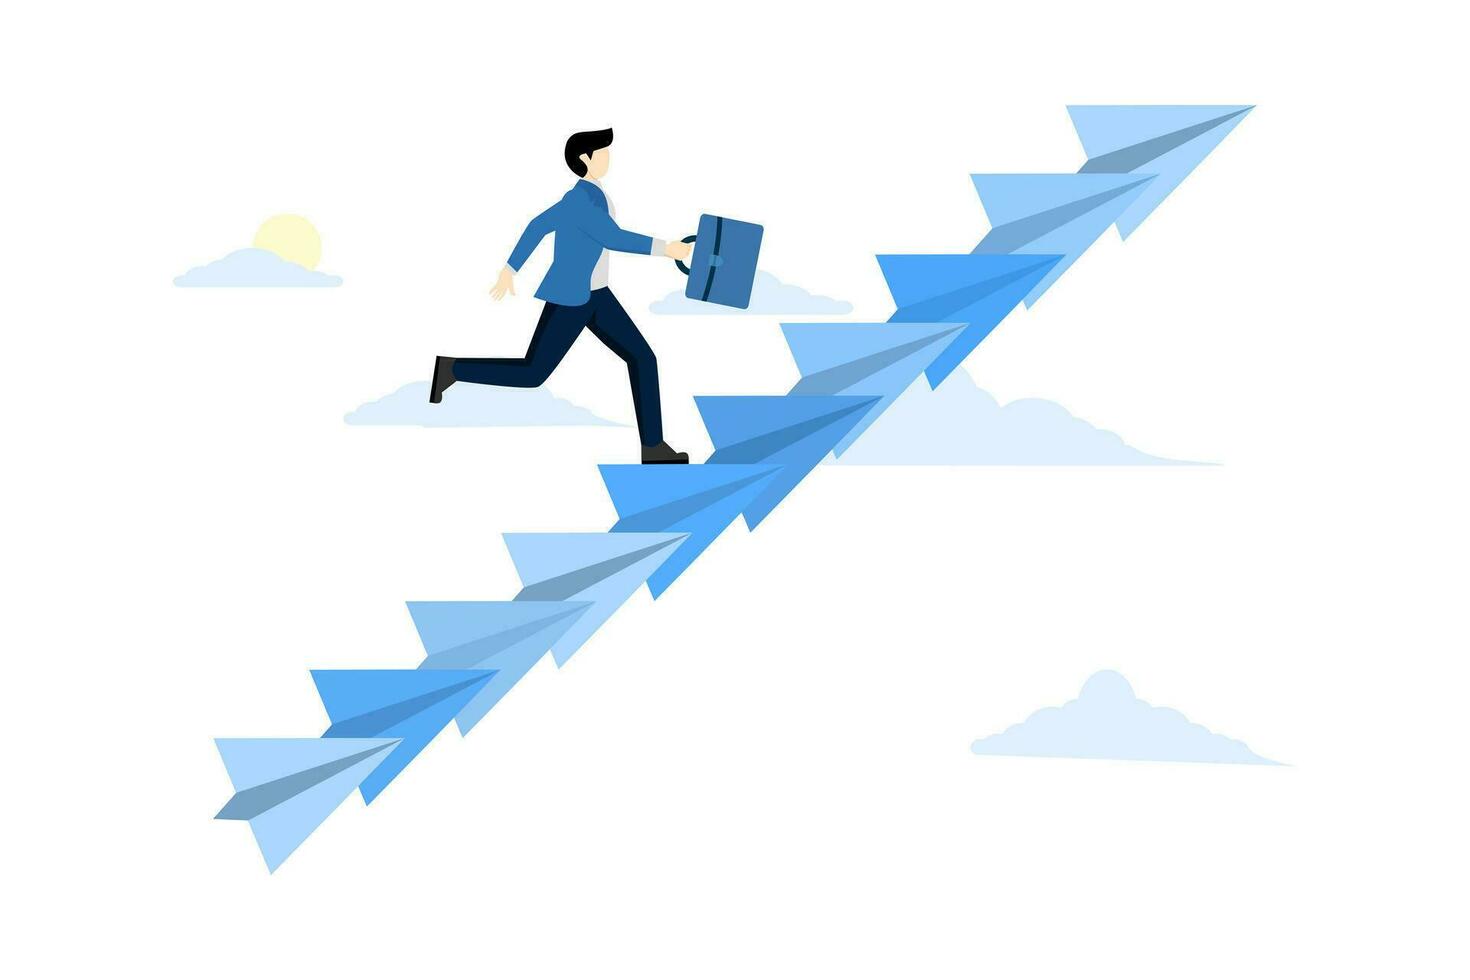 Concept of career growth, business growth or leadership to overcome challenges, motivation for success, development or ambition for success, confident businessman climbing the paper plane ladder. vector